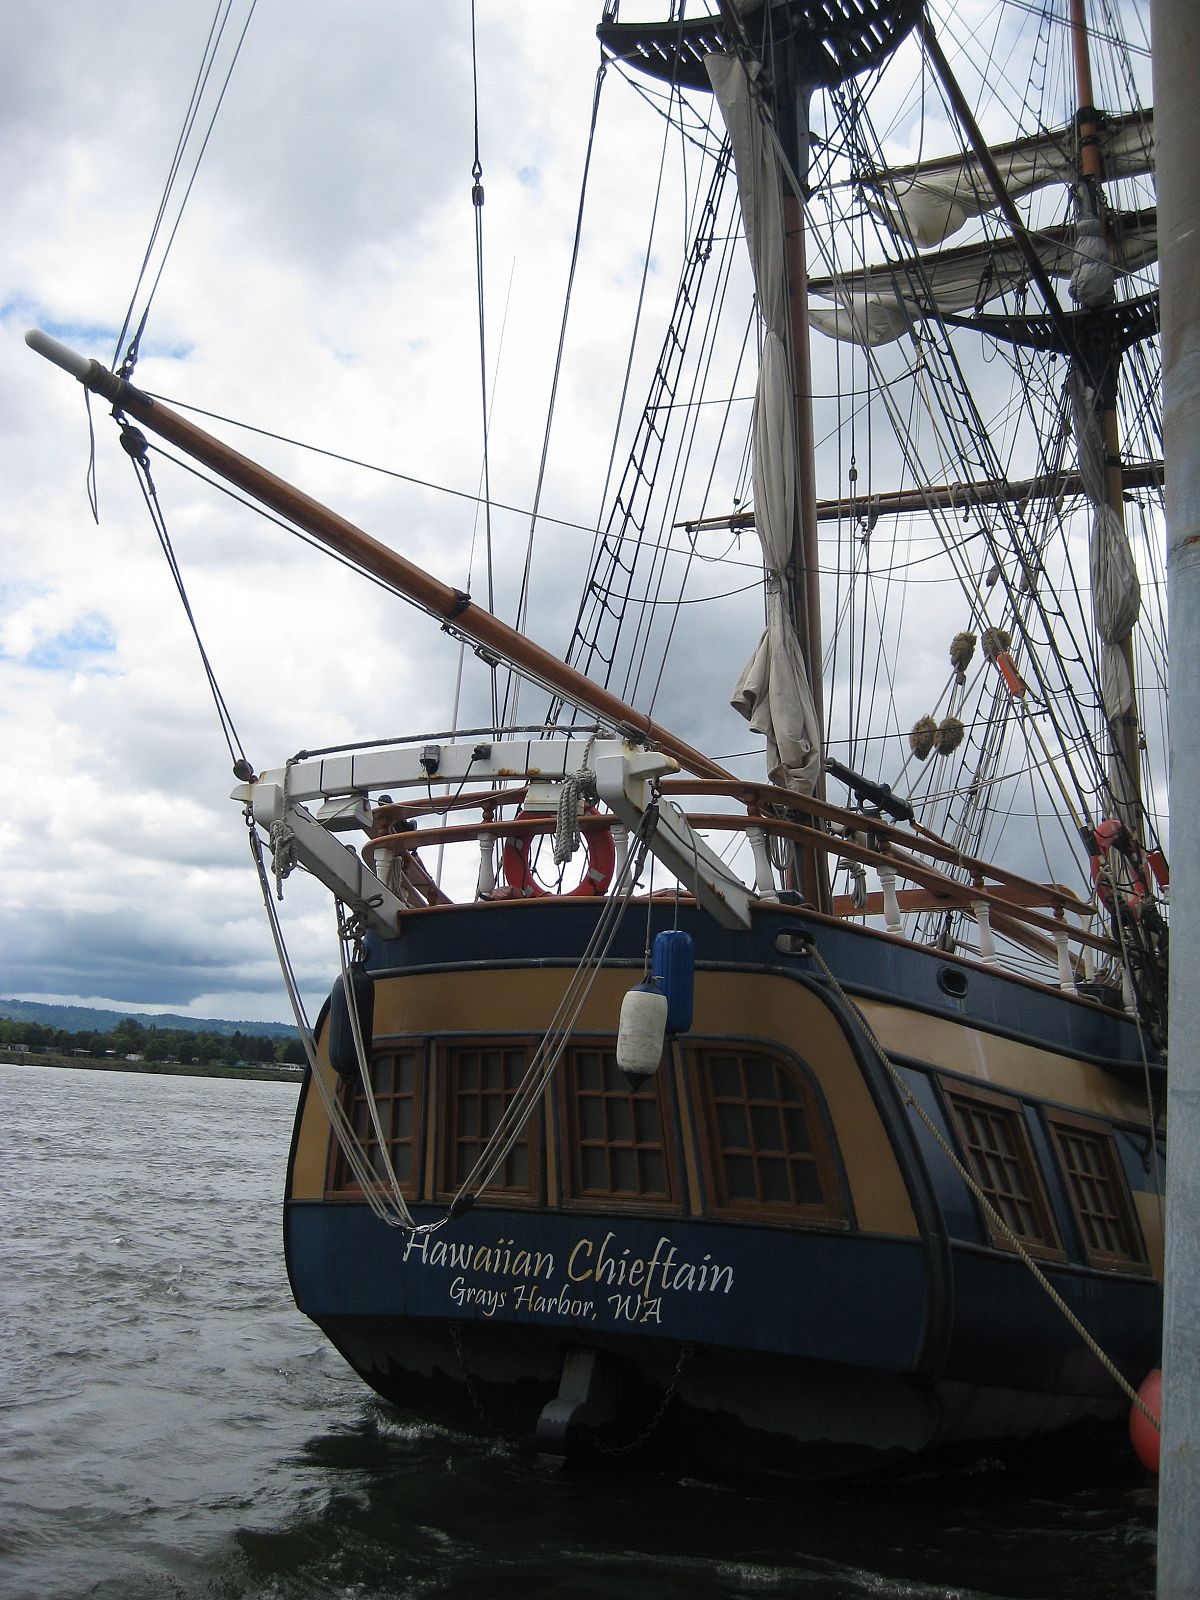 The Hawaiian Chieftain - from the Battle Sail May 2013 photo gallery.